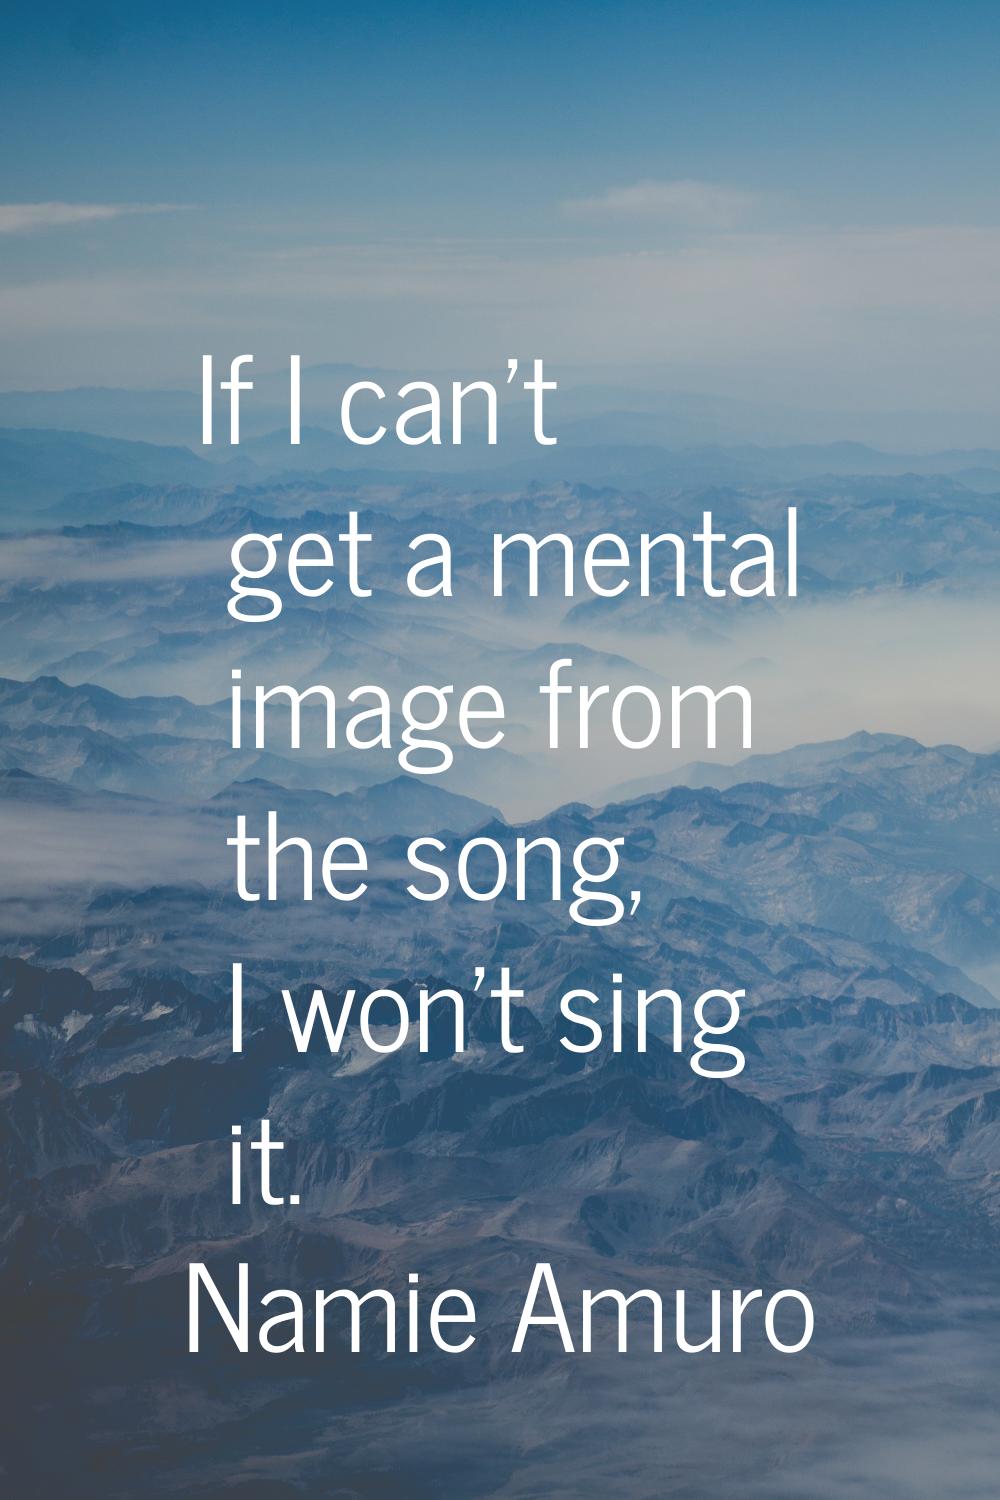 If I can't get a mental image from the song, I won't sing it.